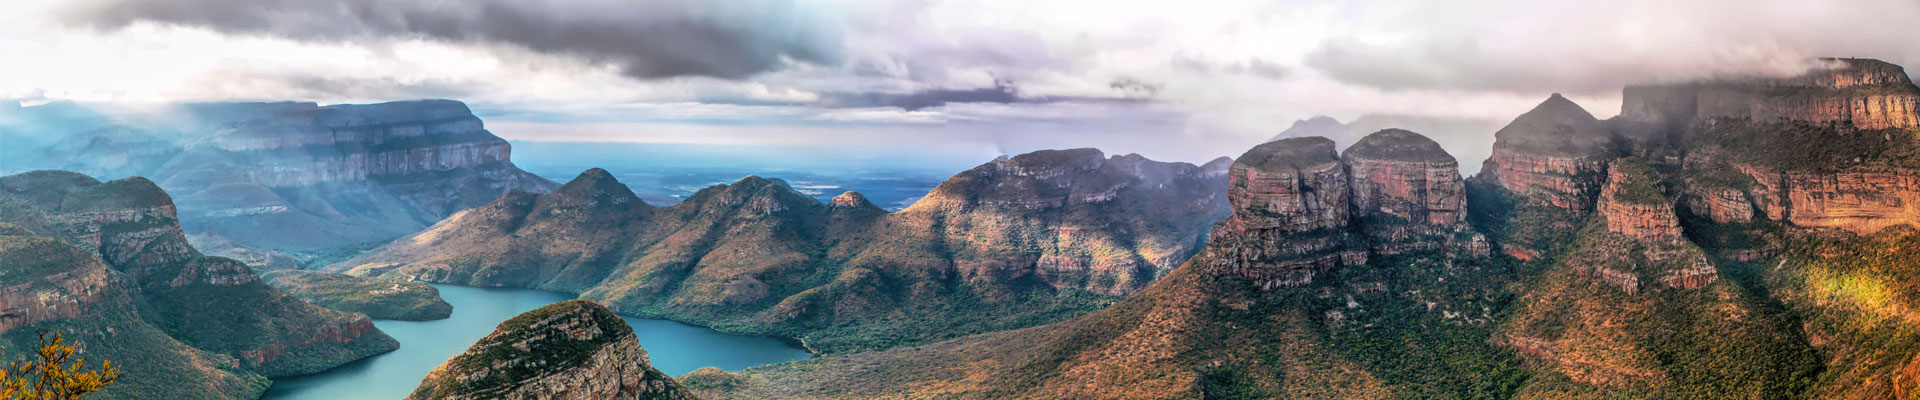 View from Table Mountain, South Africa